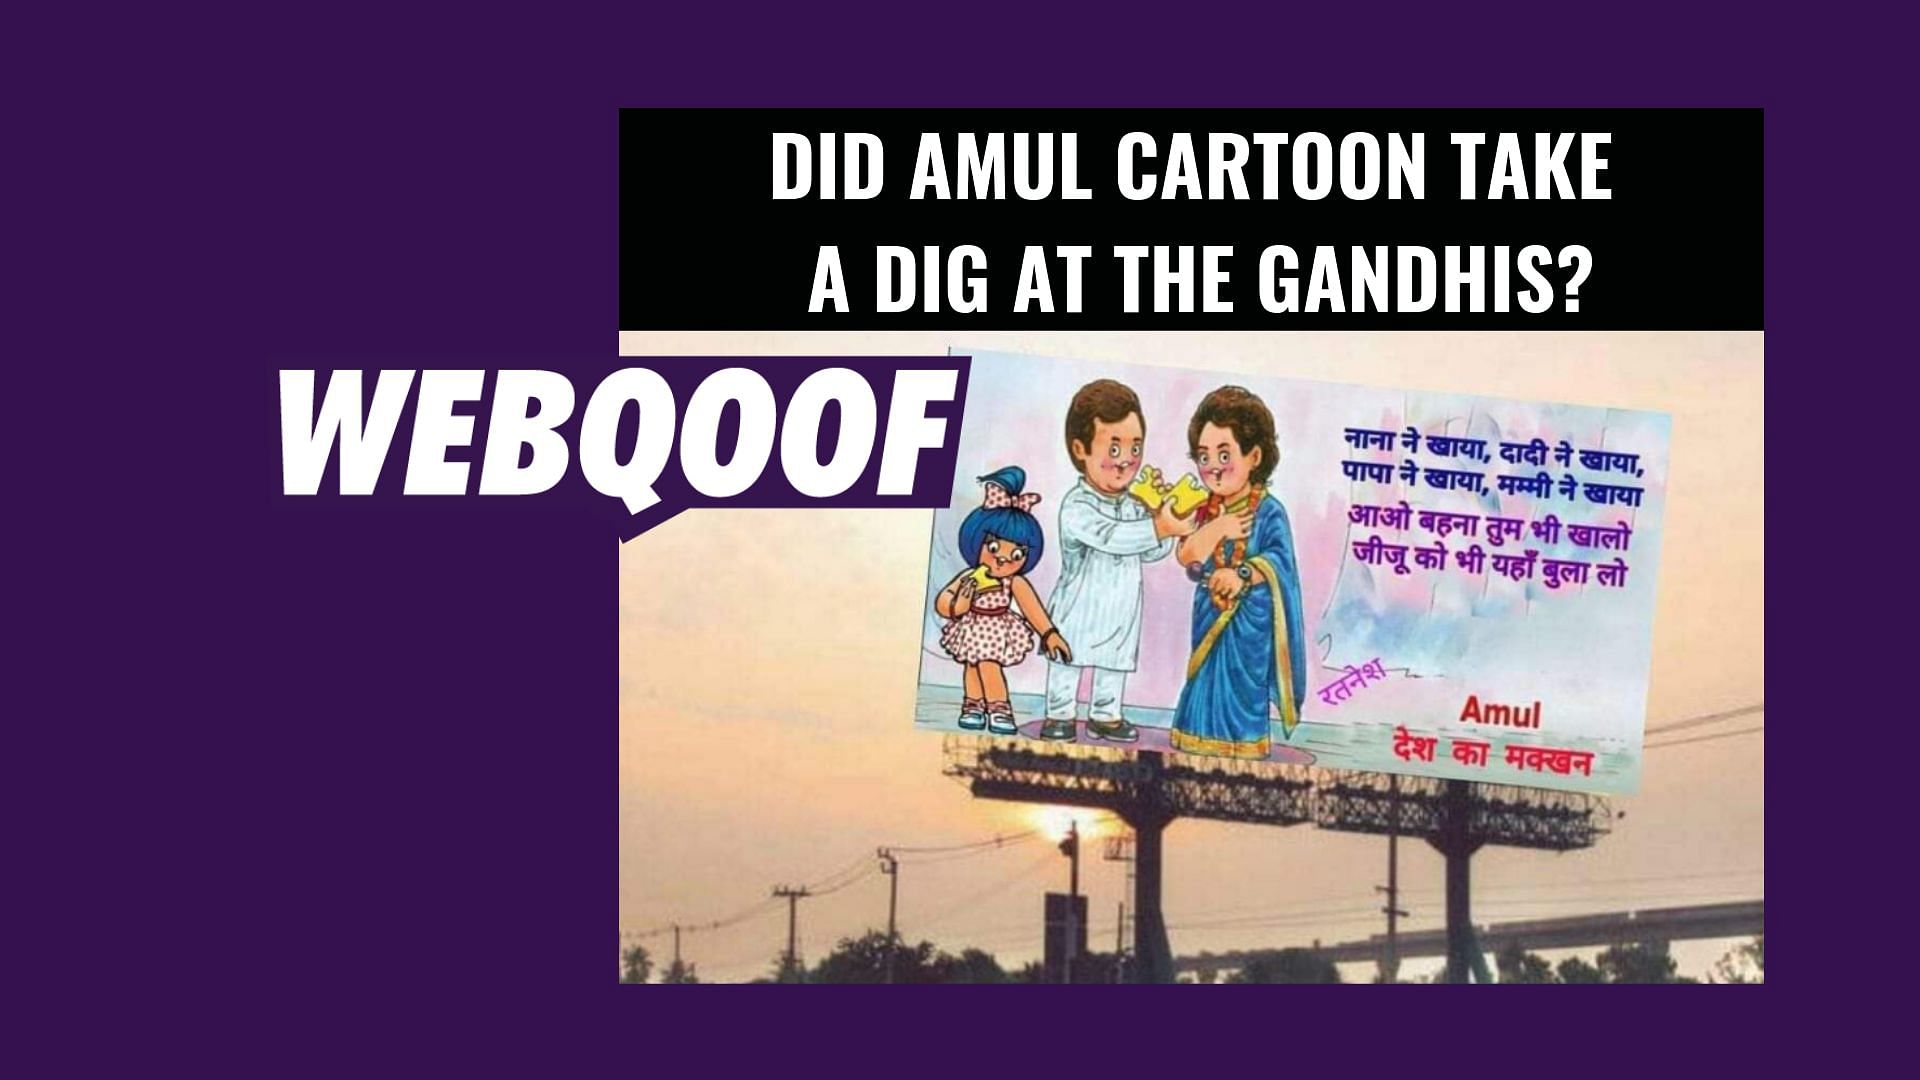 A billboard falsely claimed that Amul took a dig at the Gandhi family.